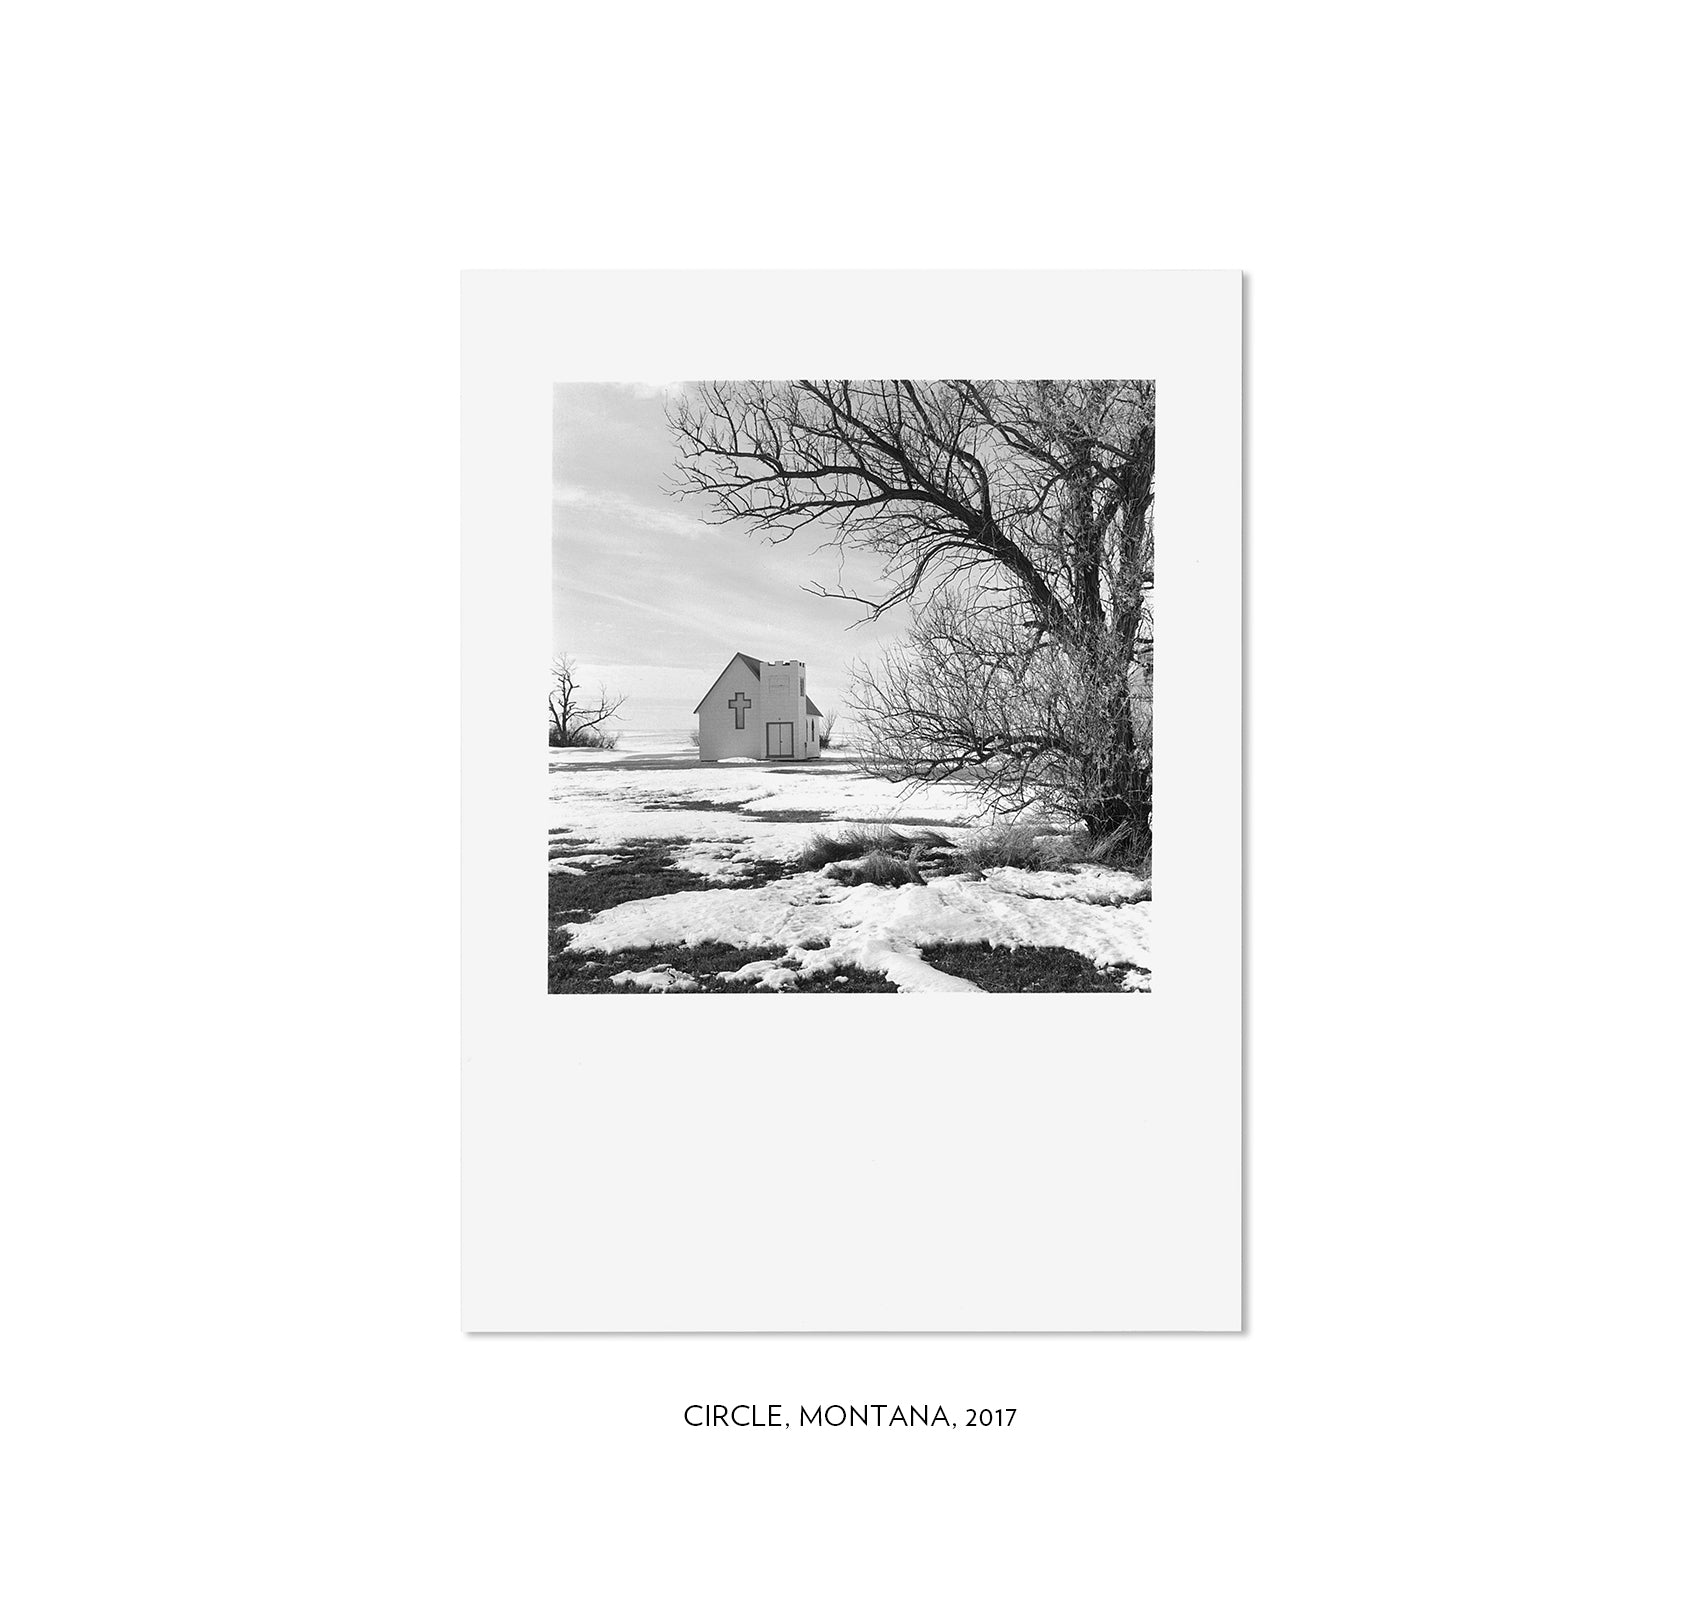 AMERICAN WINTER by Gerry Johansson [SPECIAL EDITION]